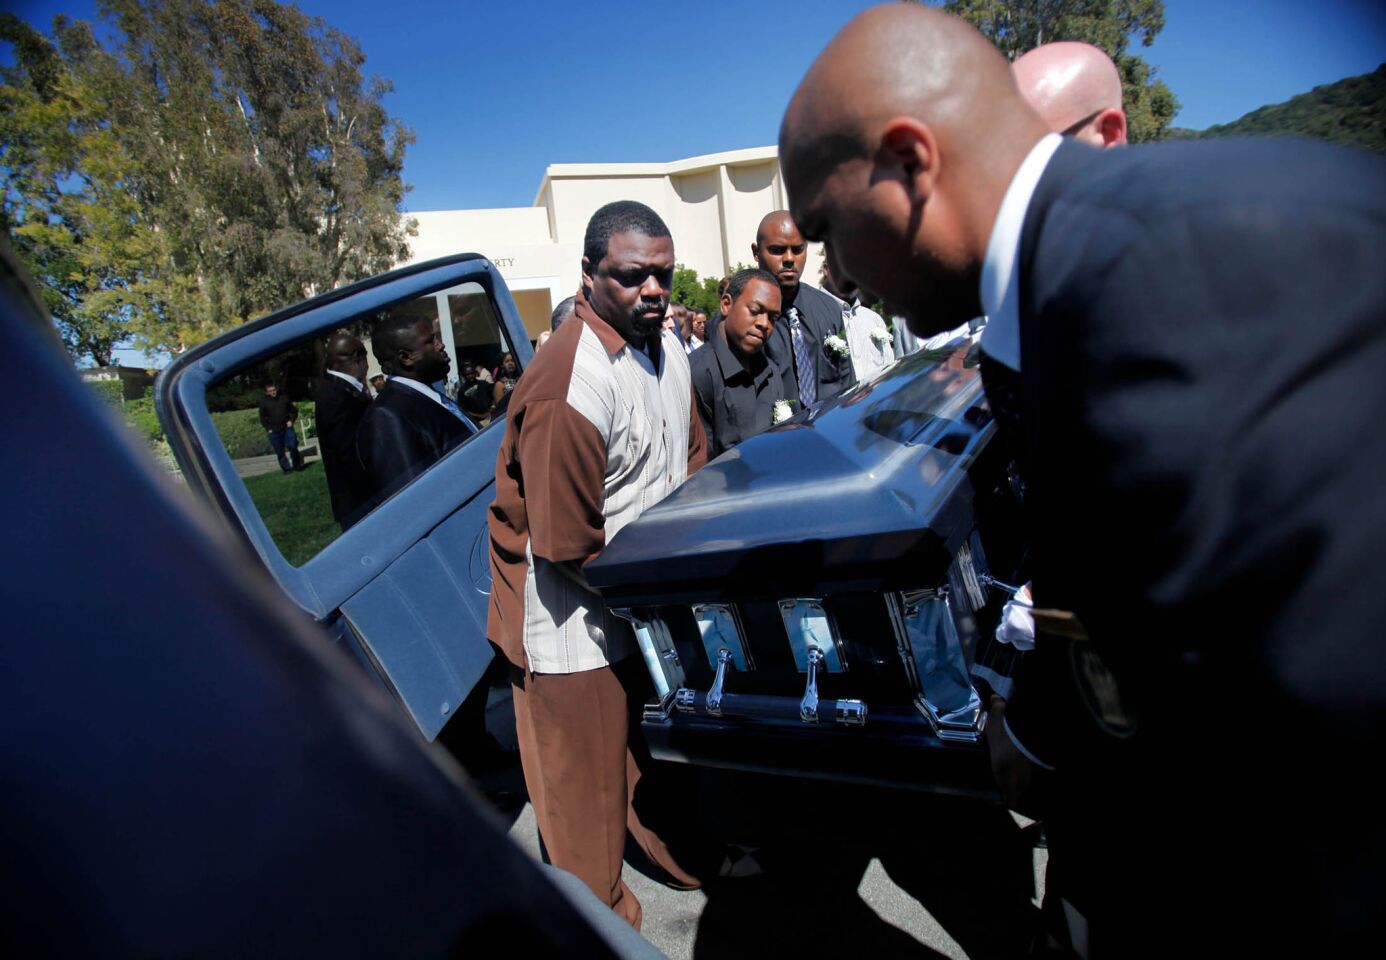 Rodney King's coffin at Forest Lawn Hollywood Hills cemetery June 30, 2012, some two weeks after he died in his swimming pool.